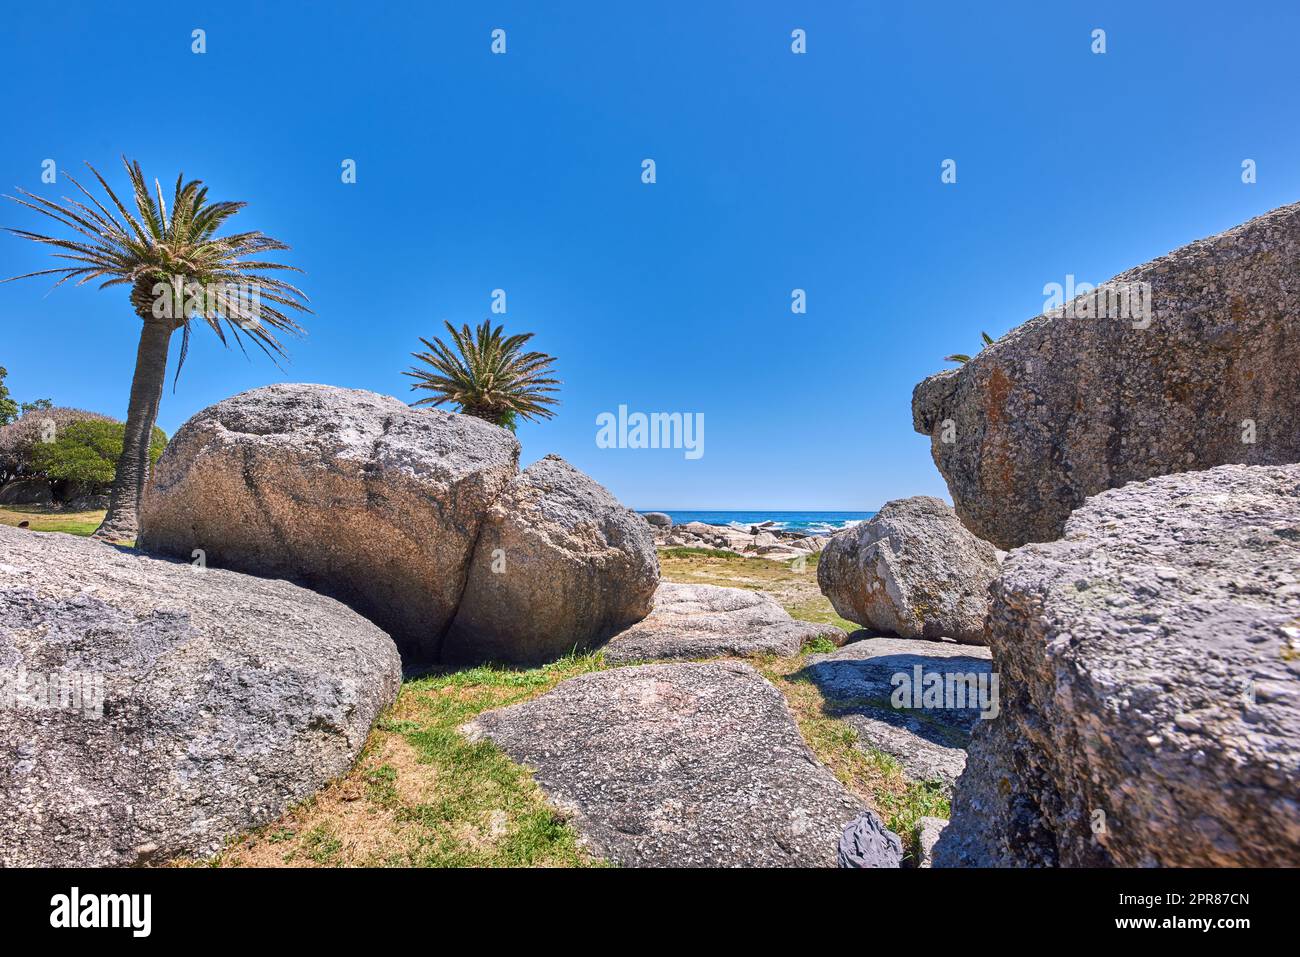 Rocky coastline of the Camps Bay, Western Cape. Ocean view - Camps Bay, Table Mountain National Park, Cape Town, South Africa. Stock Photo